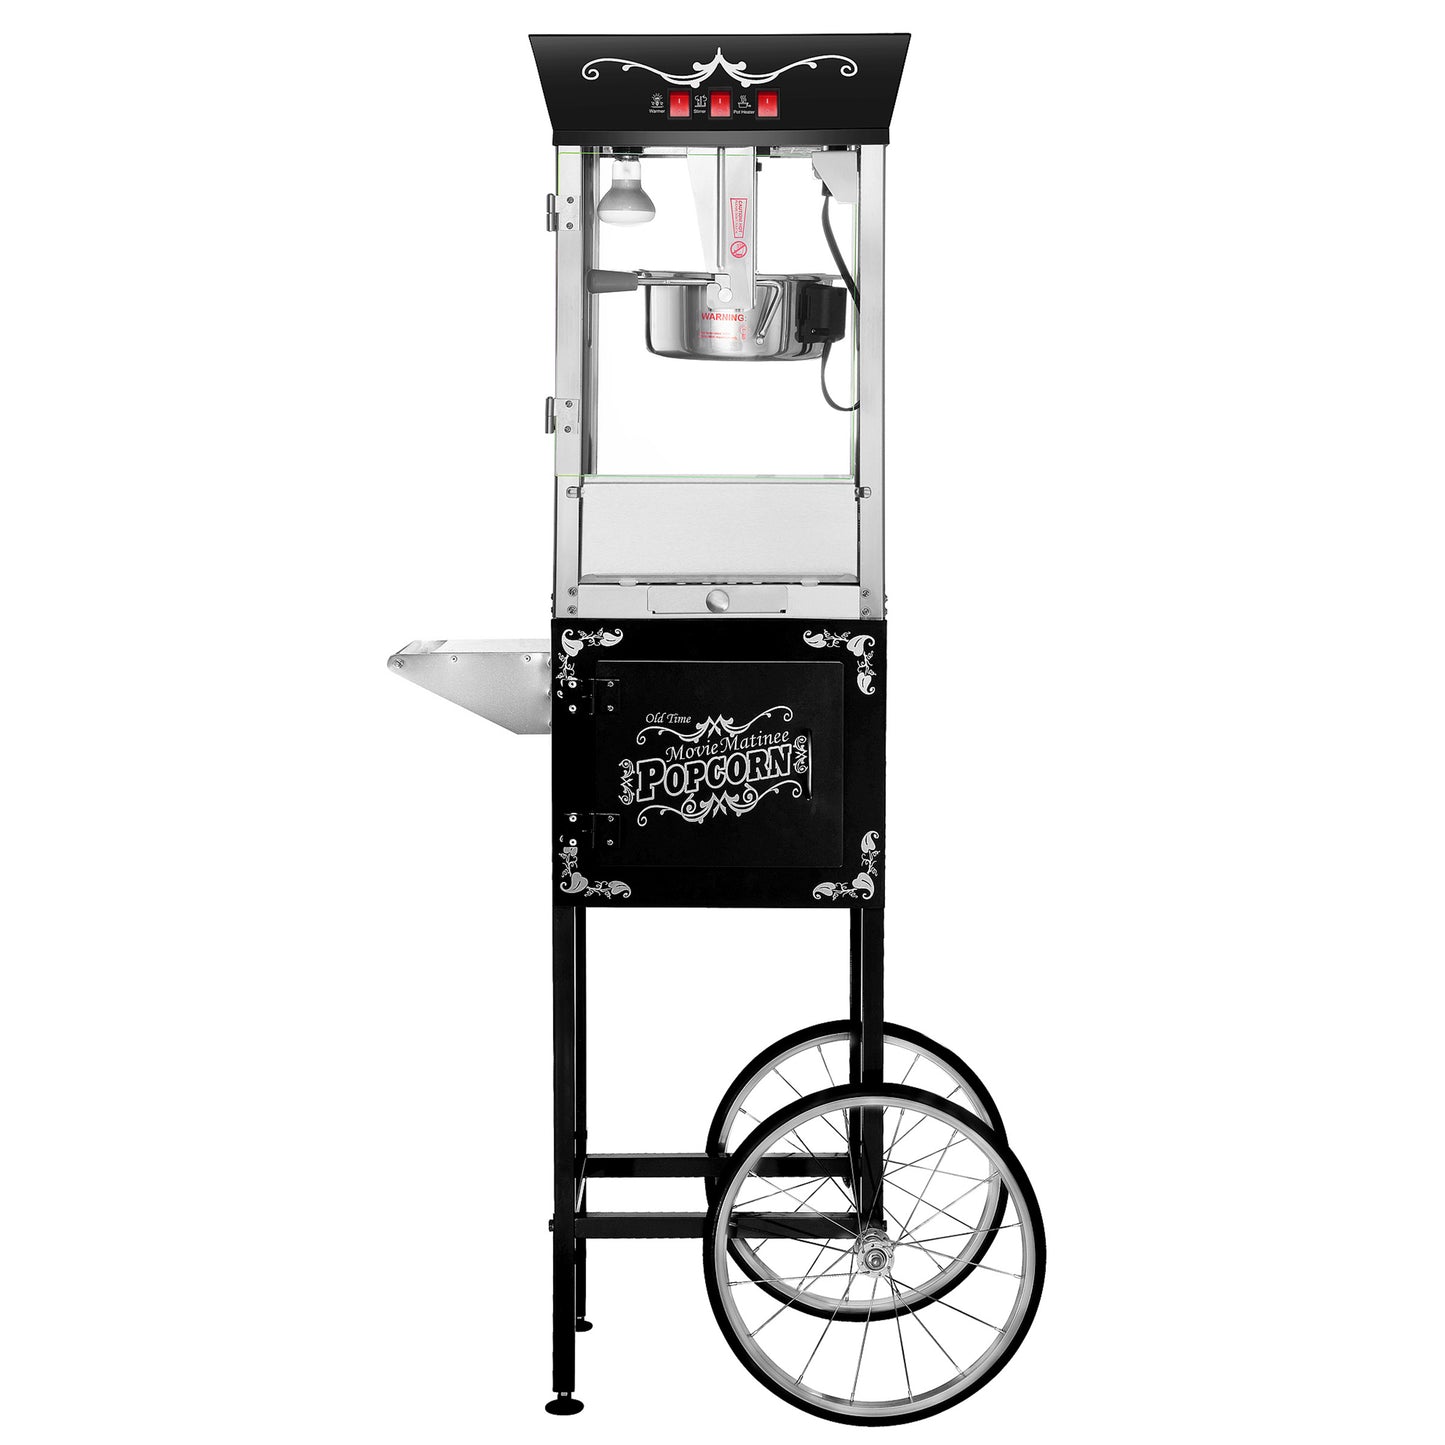 Matinee Popcorn Machine with Cart, 8 Ounce Kettle and  5 All-In-One Popcorn Packs - Black